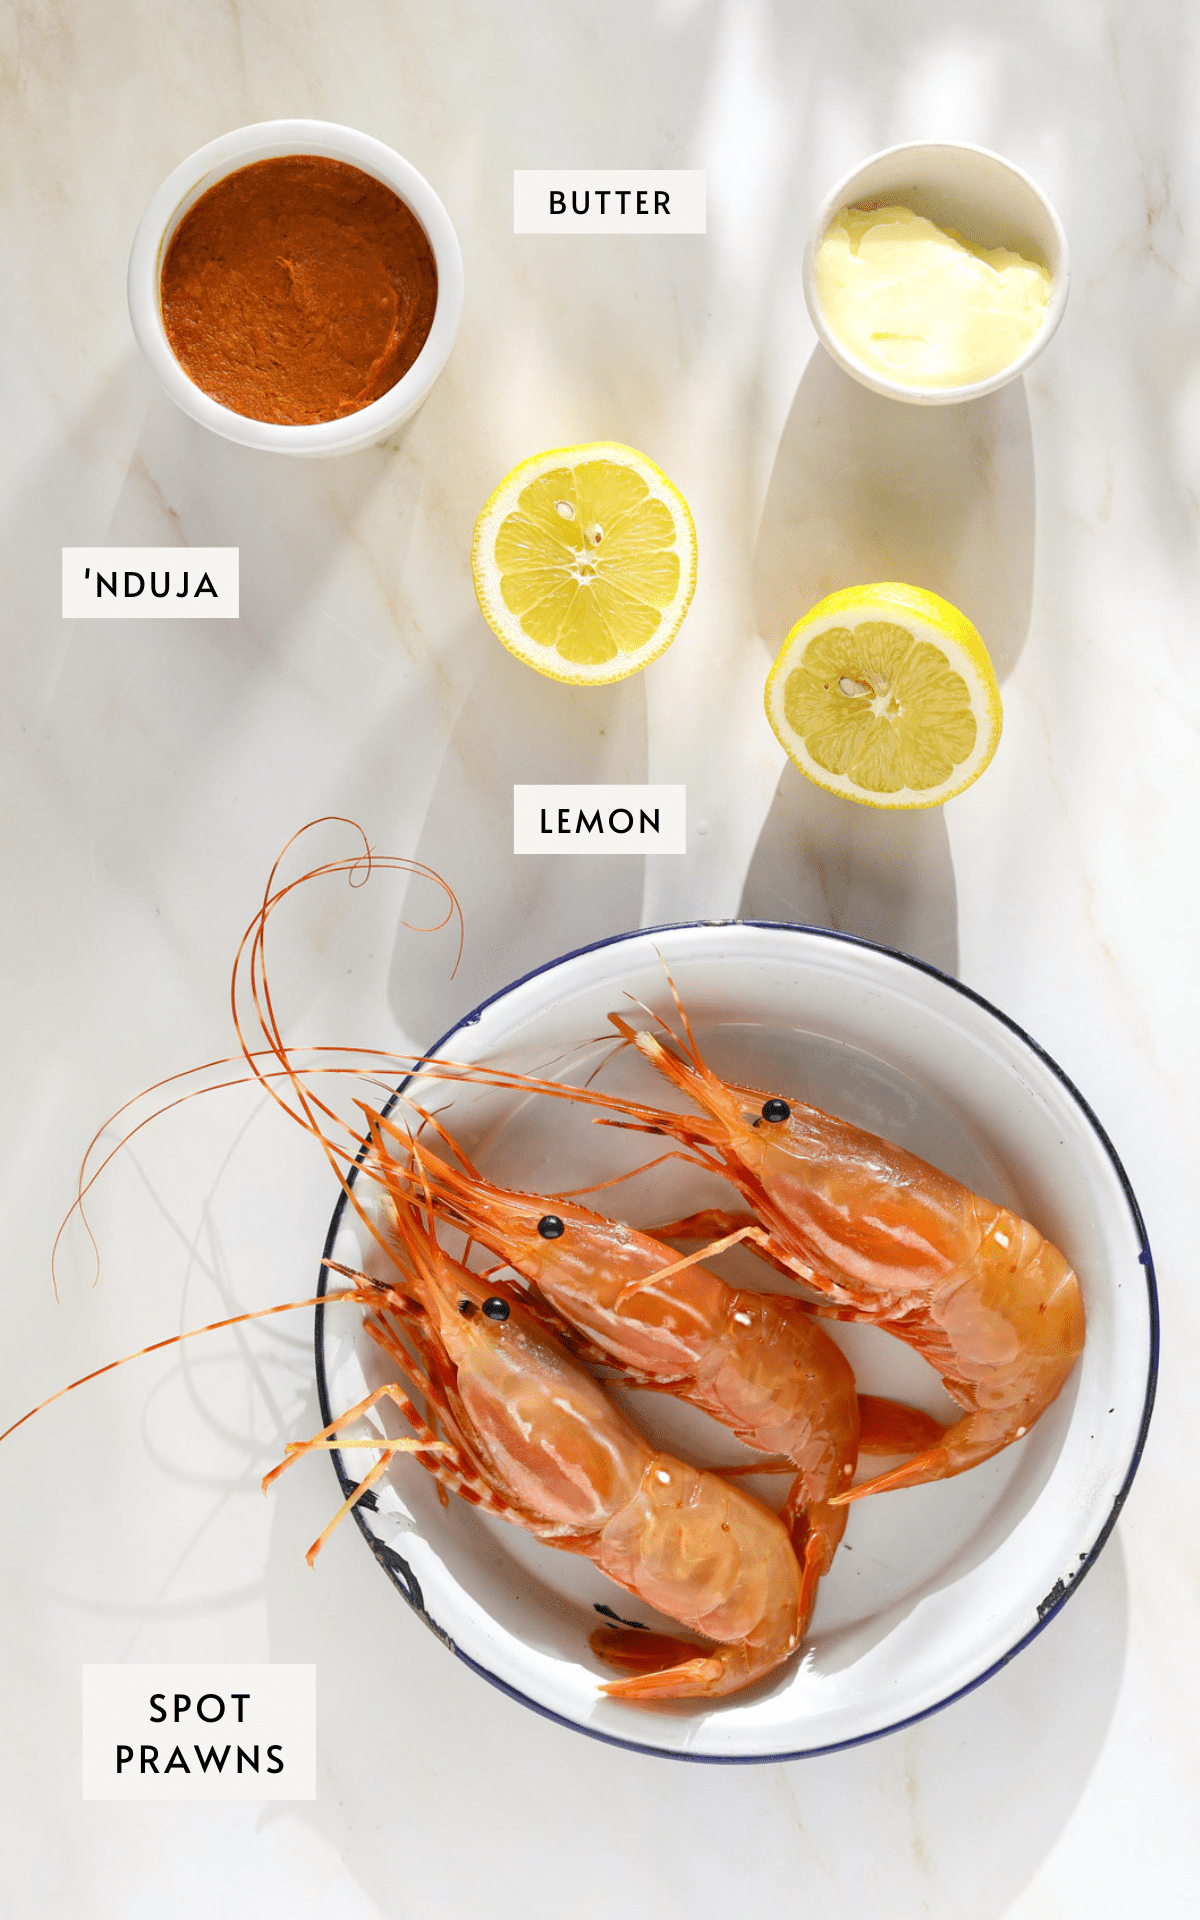 A small white dish filled with 'Nduja, a lemon sliced in half, a small ramekin of butter and a plate with three live spot prawns.